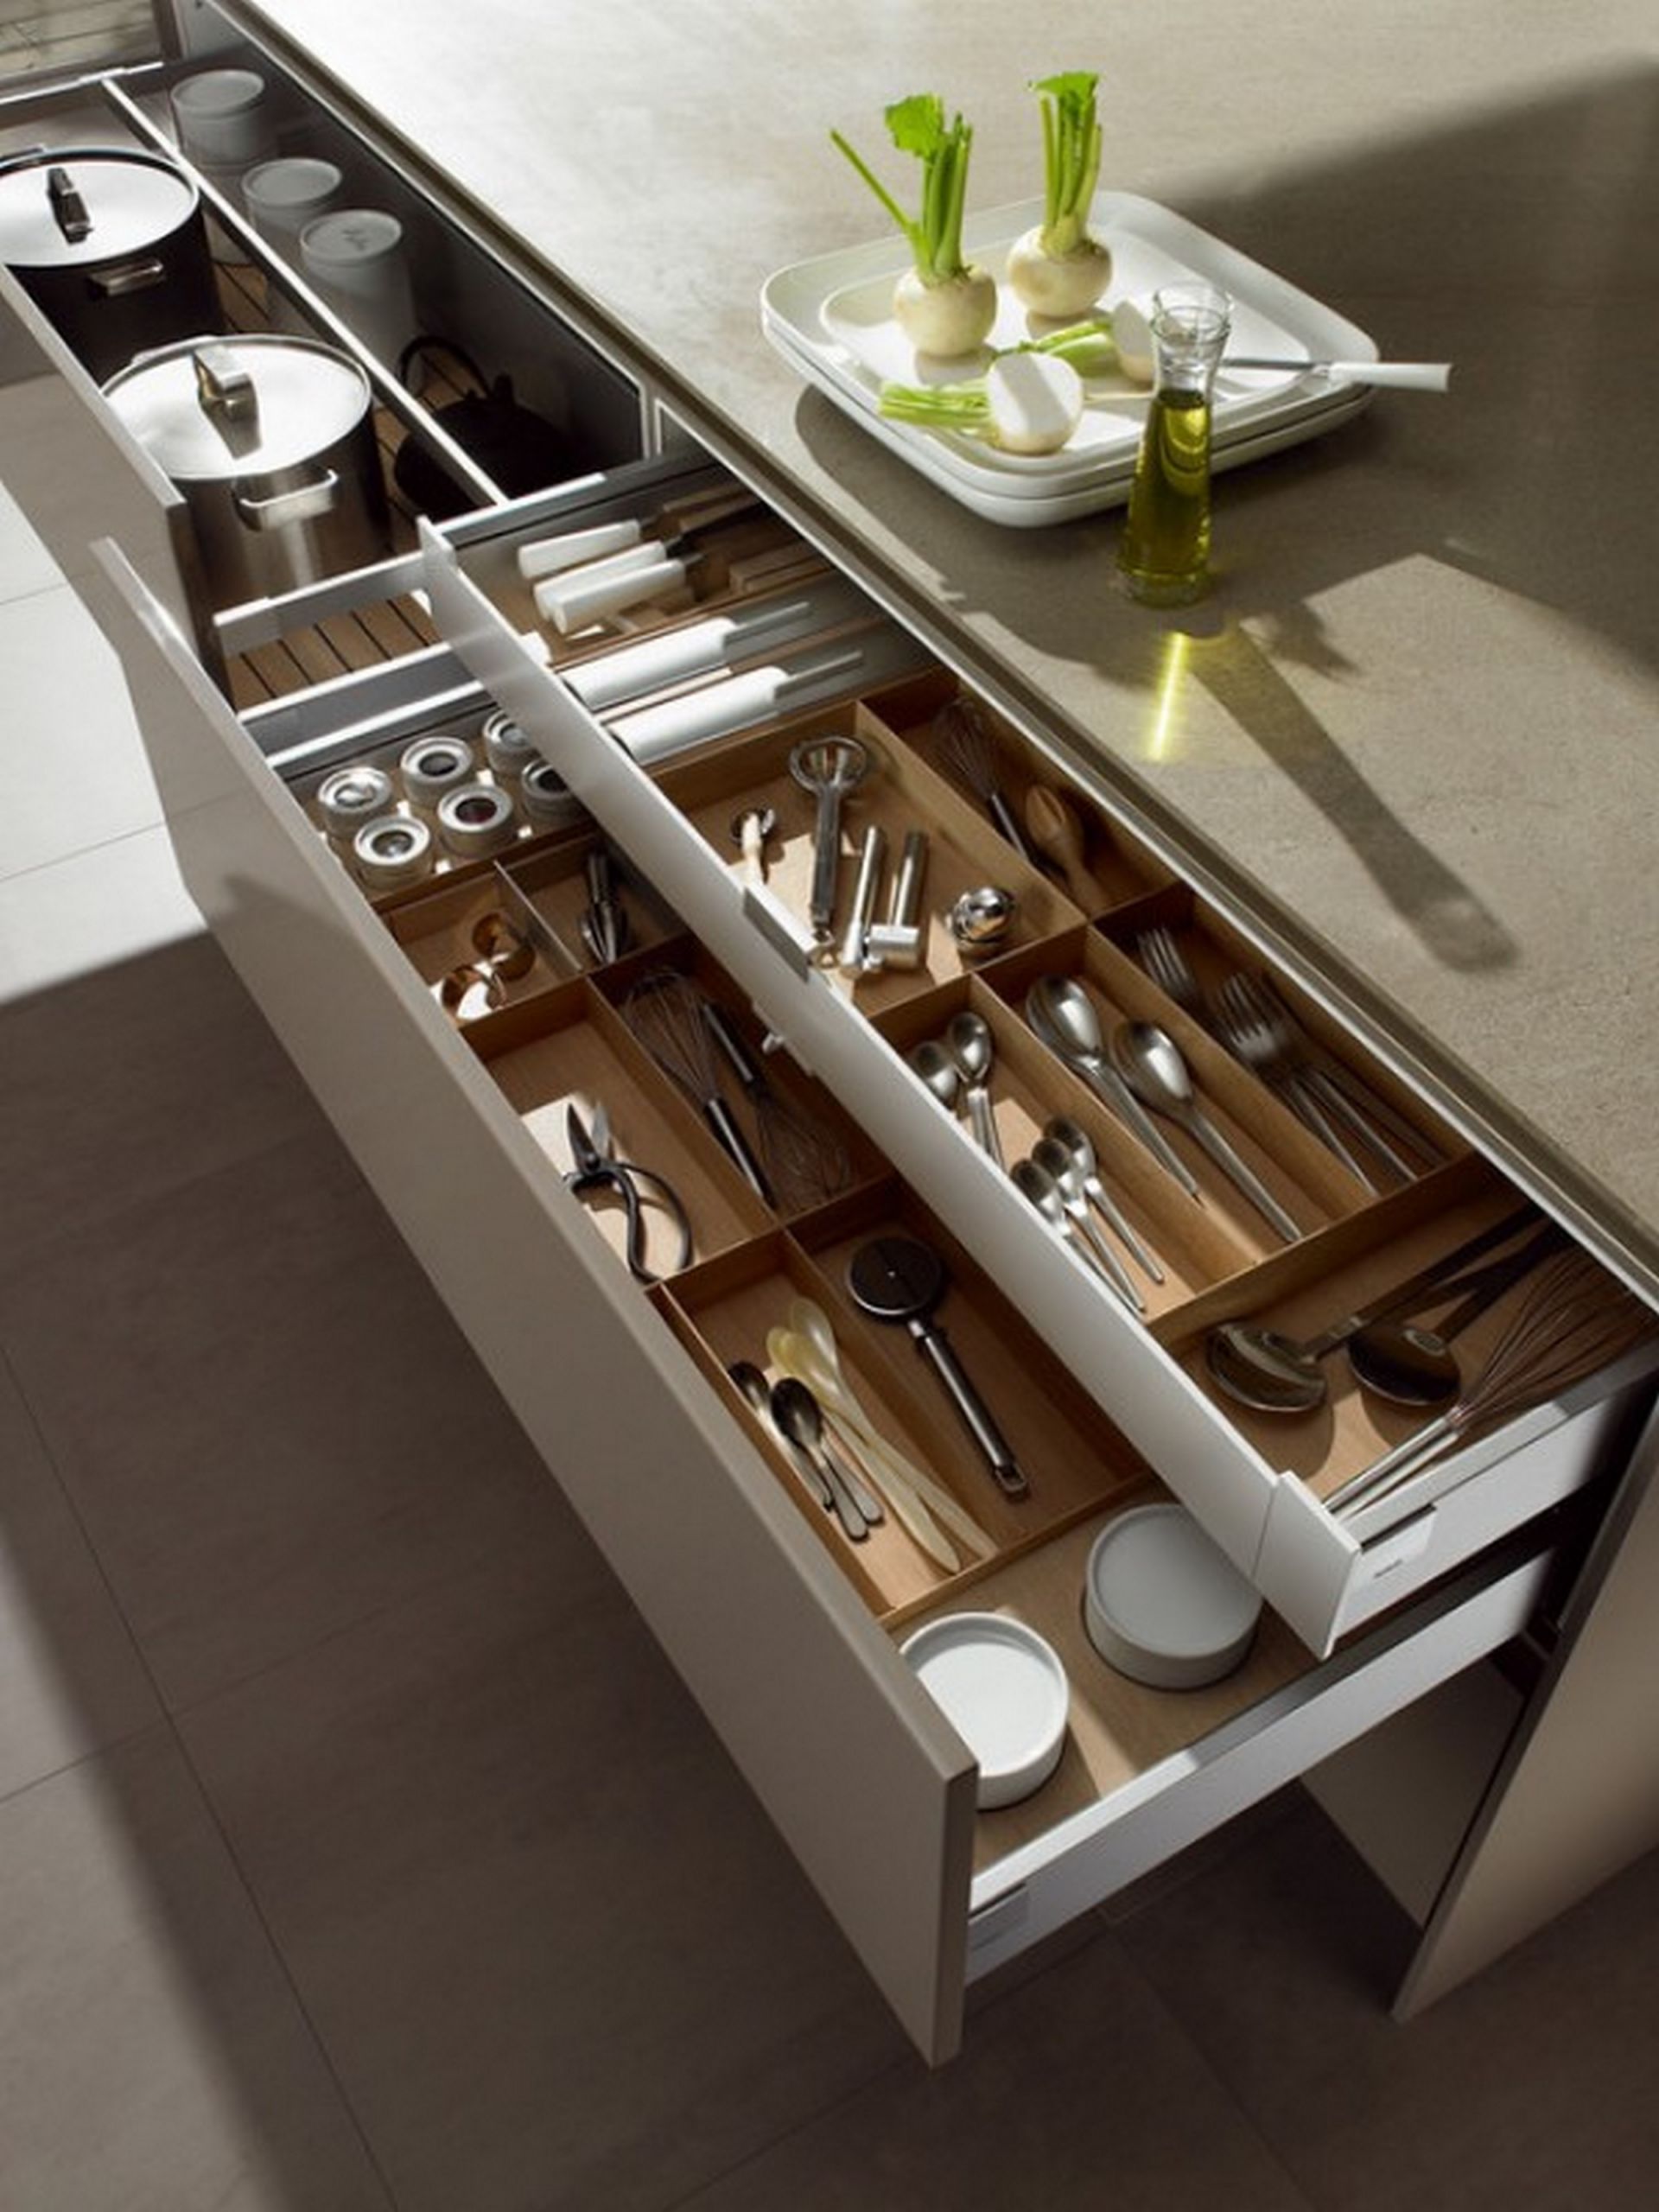 Kitchen Storage Drawers
 Tips for Perfectly Organized Kitchen Drawers